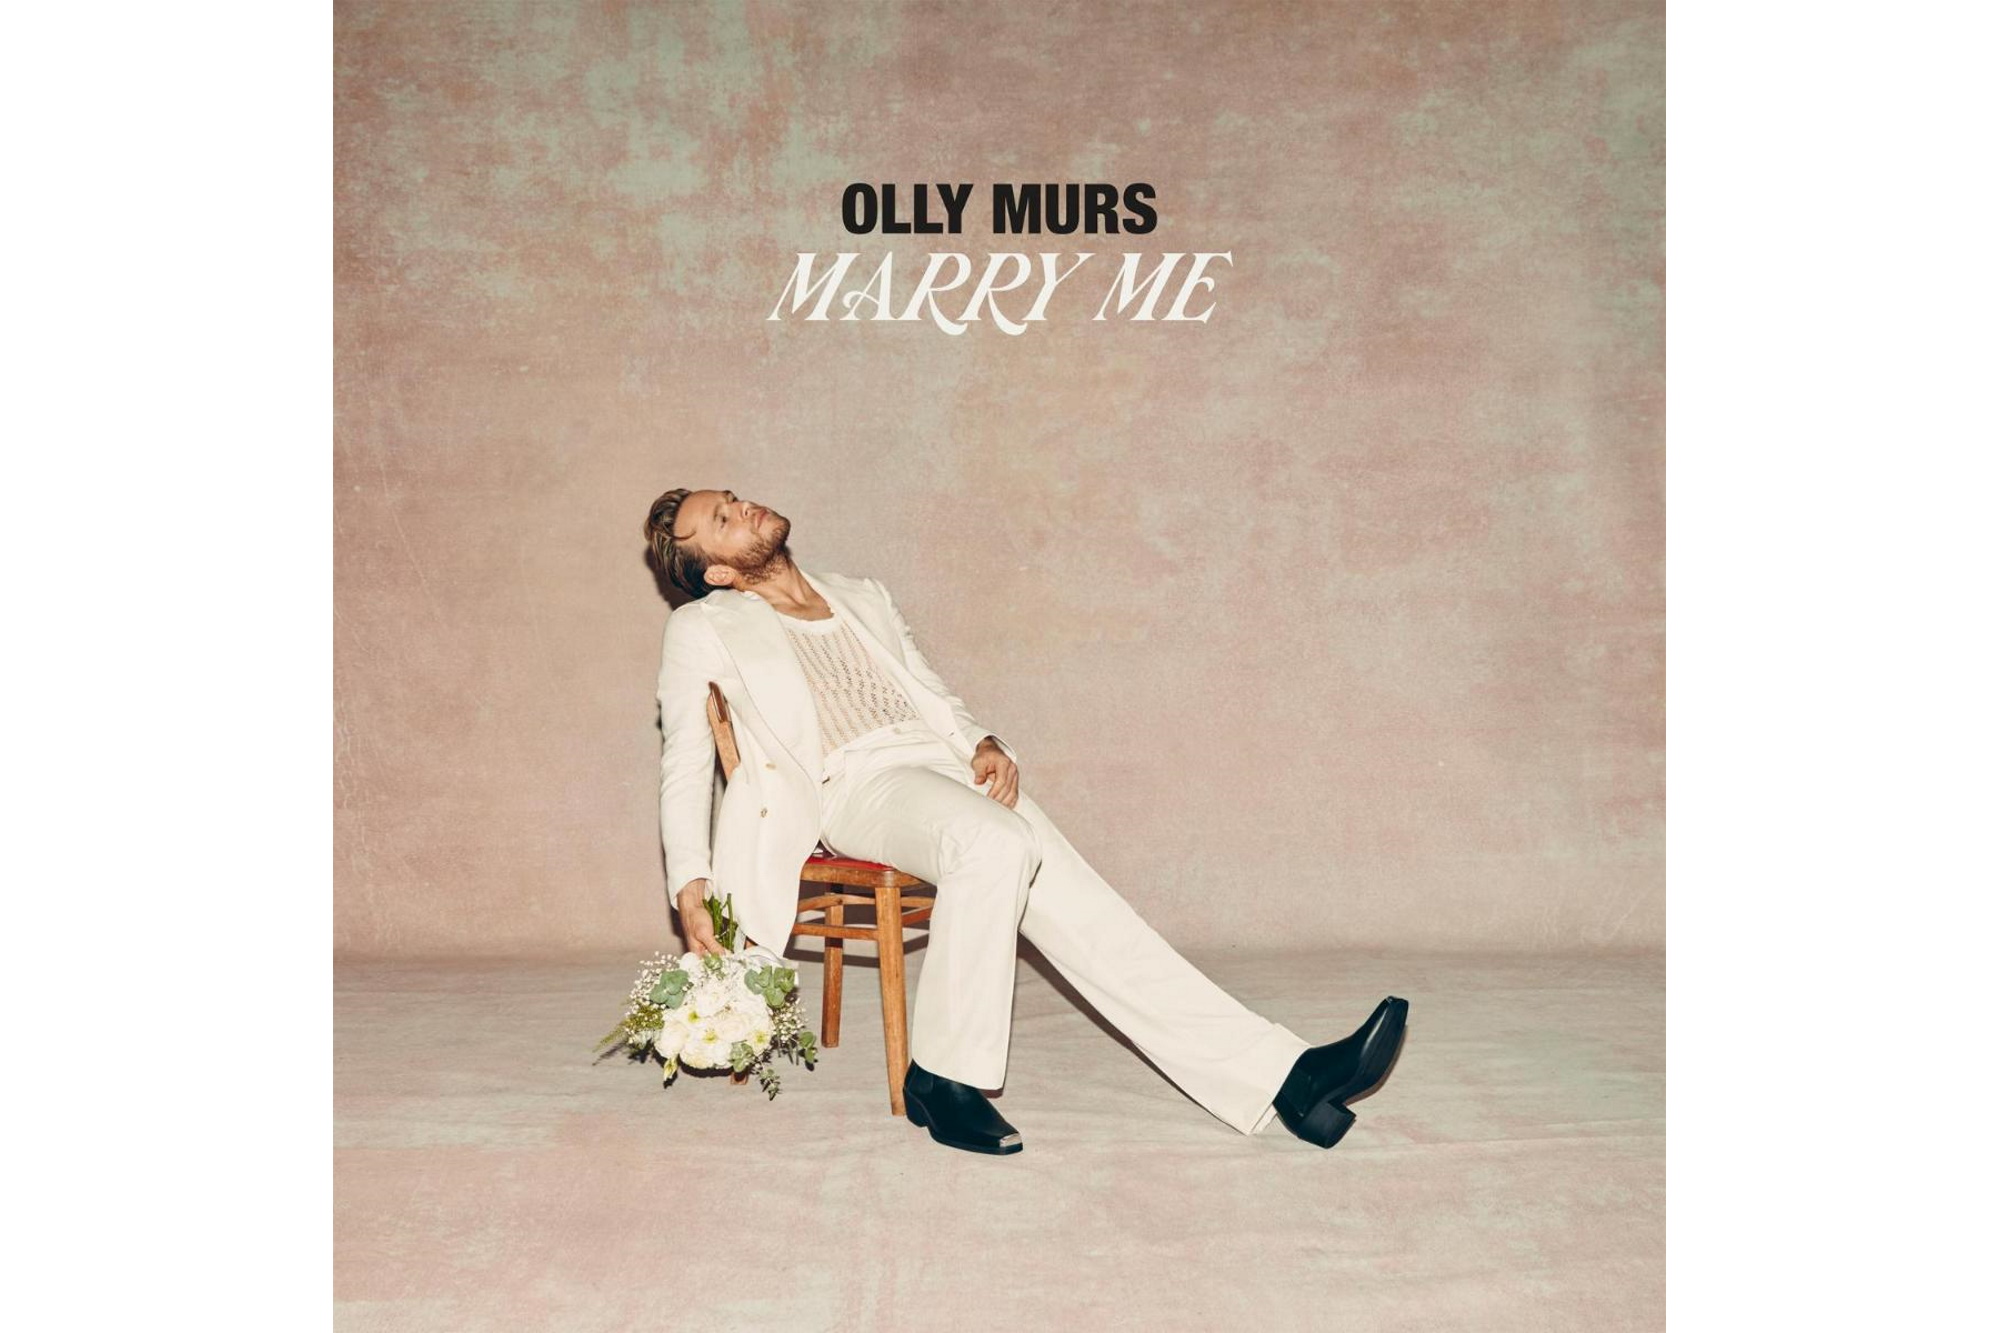 Olly Murs - Marry Me